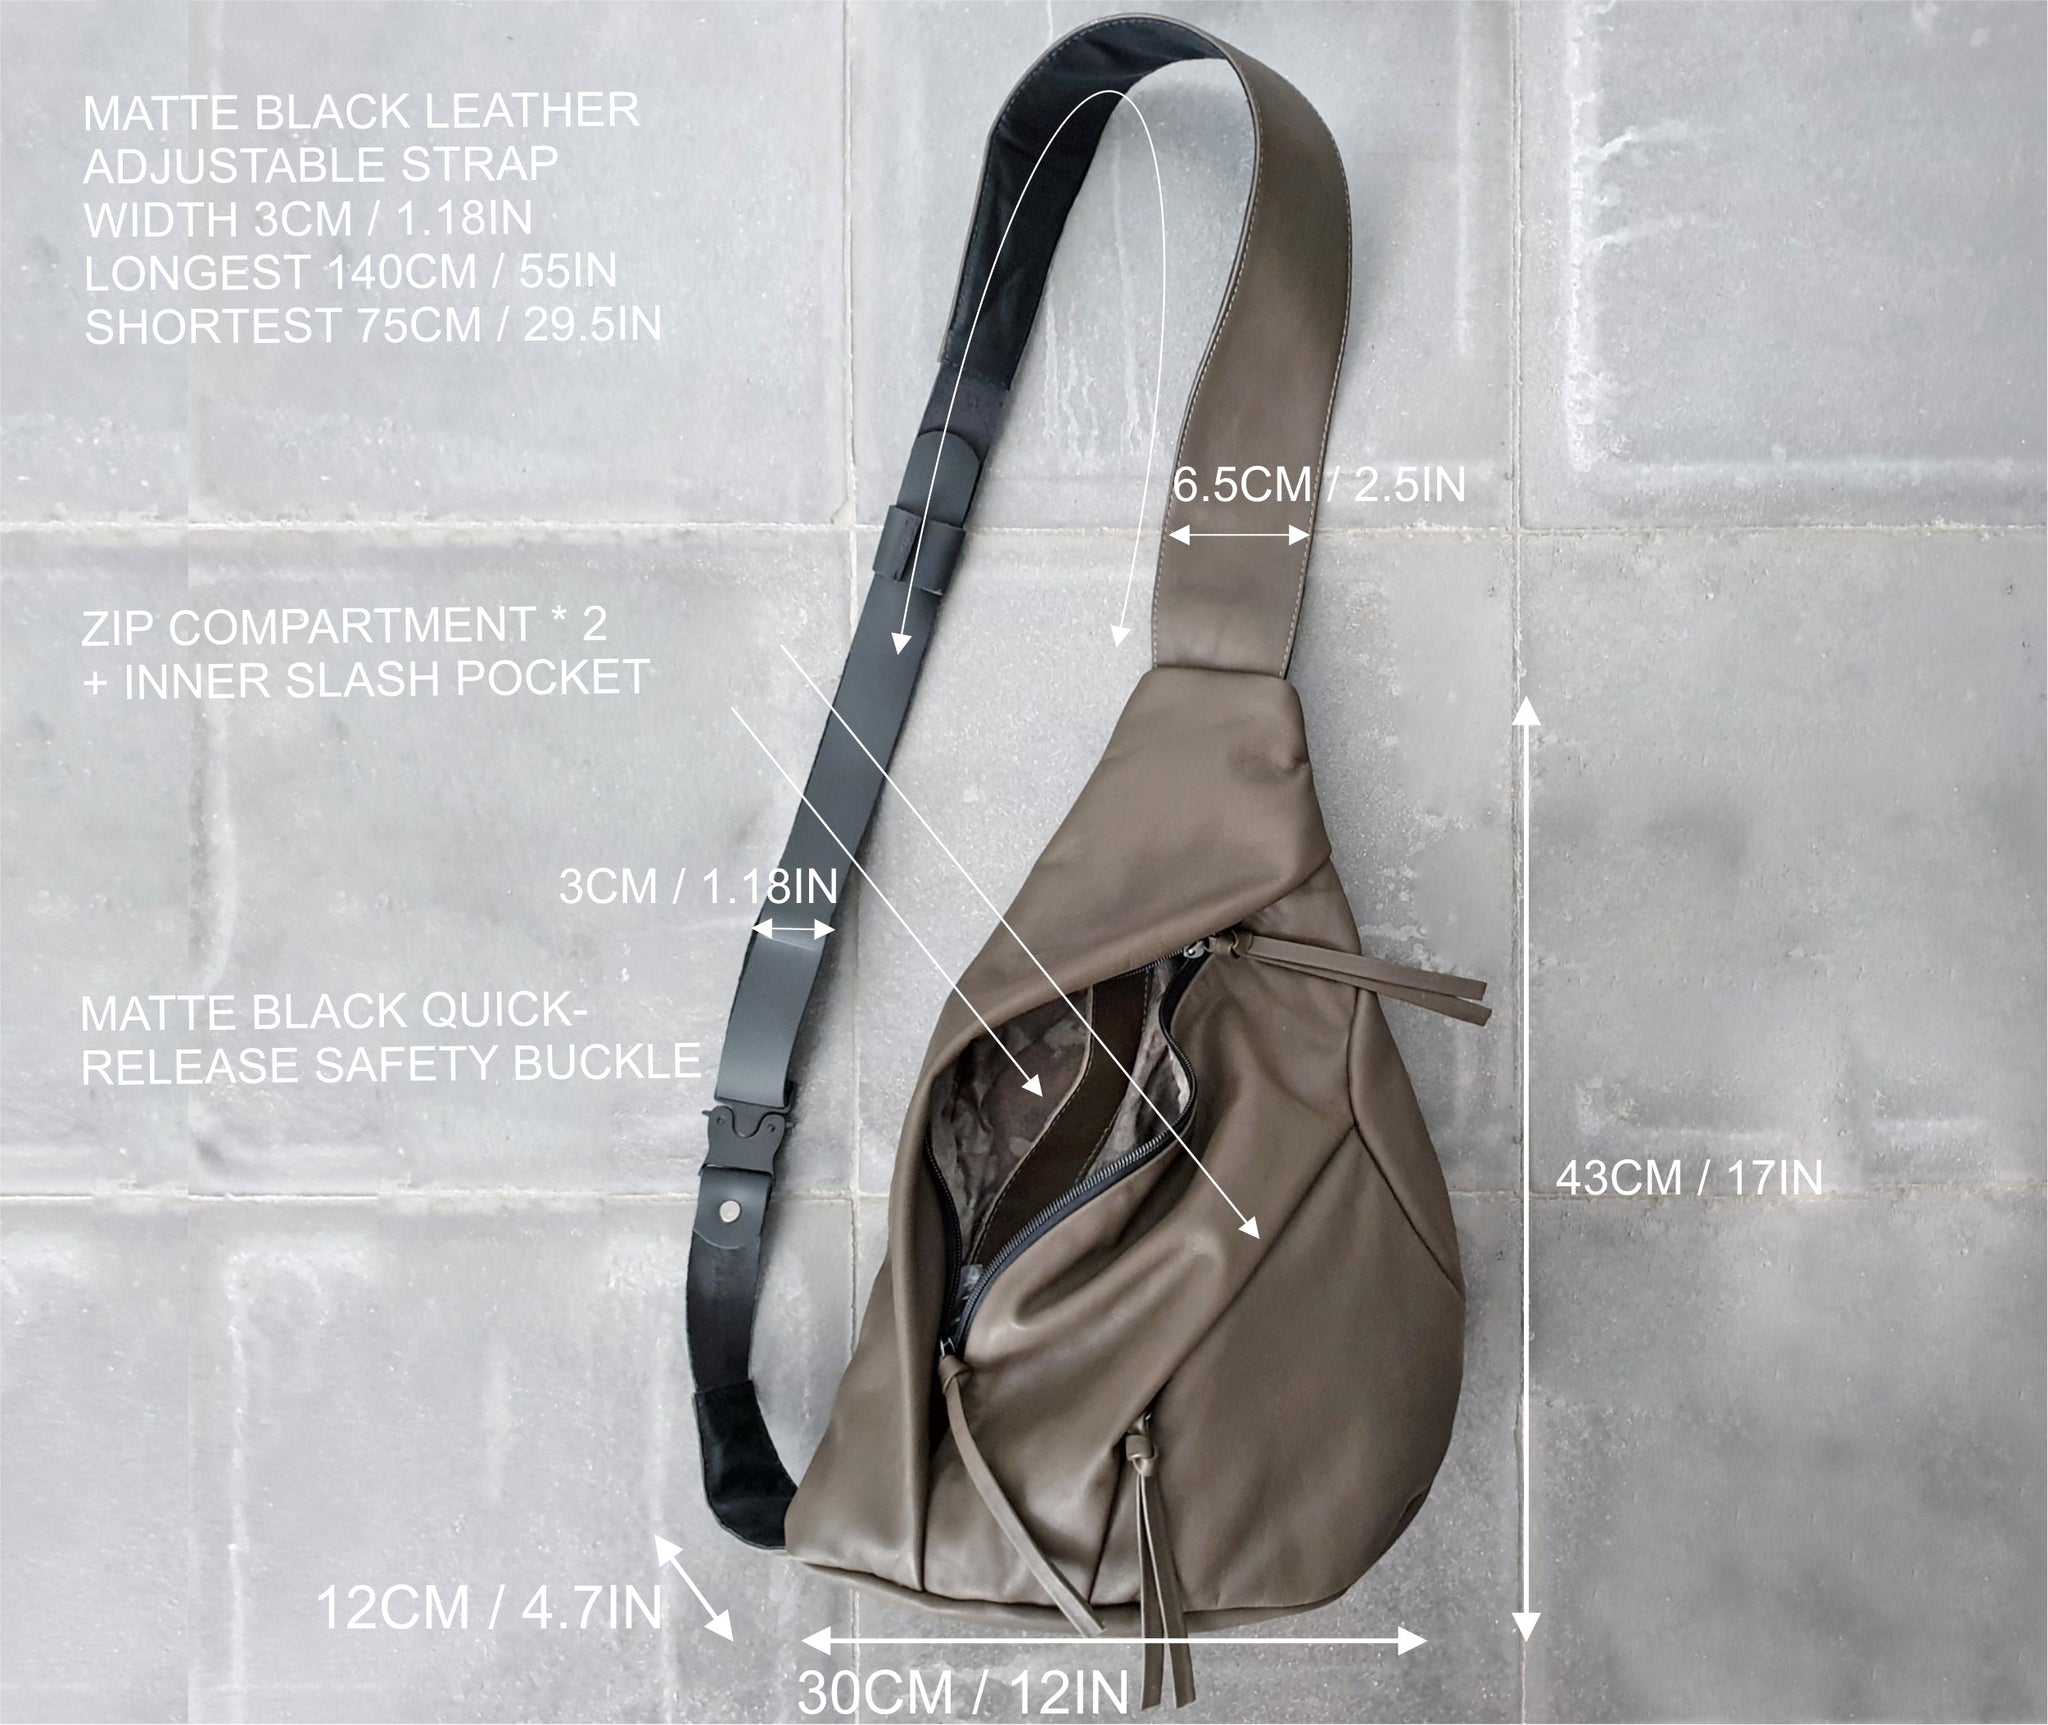 ✓LV 3 in 1 Detachable Sling Bag😉 - C&C Fashion Collection